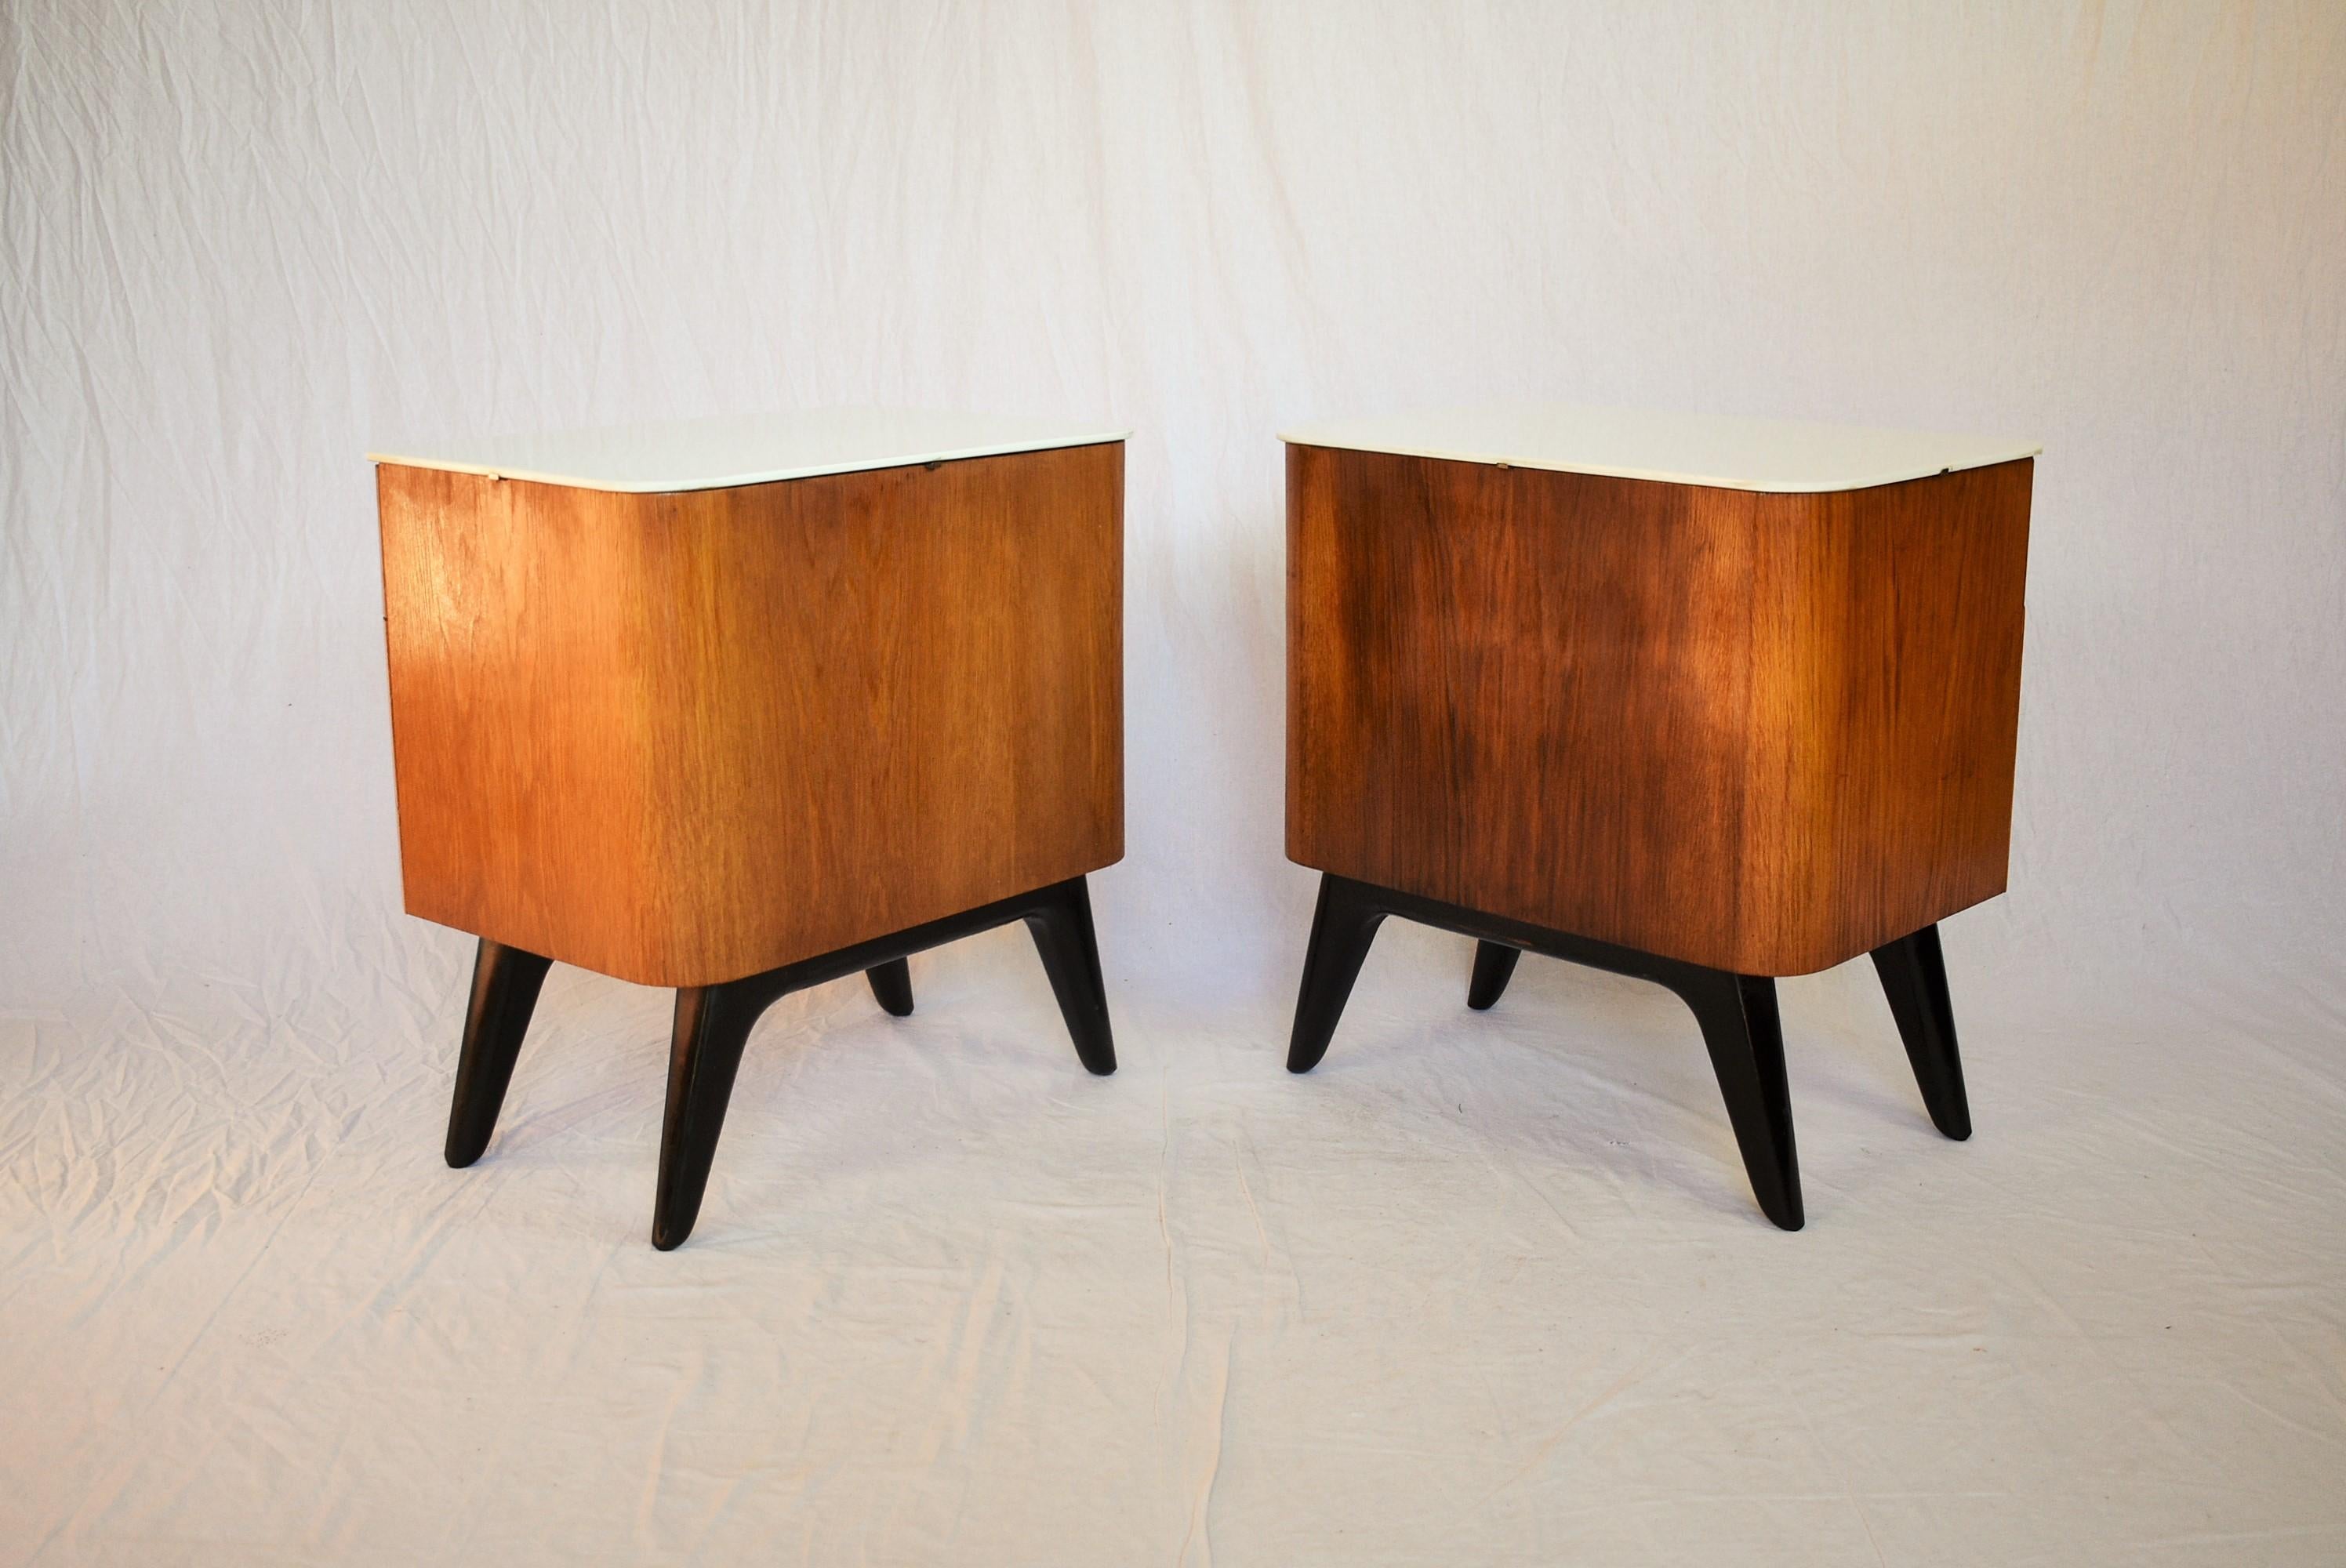 Czech Pair of Mid-Century Night Tables, Designed by Jindrich Halabala, 1950's